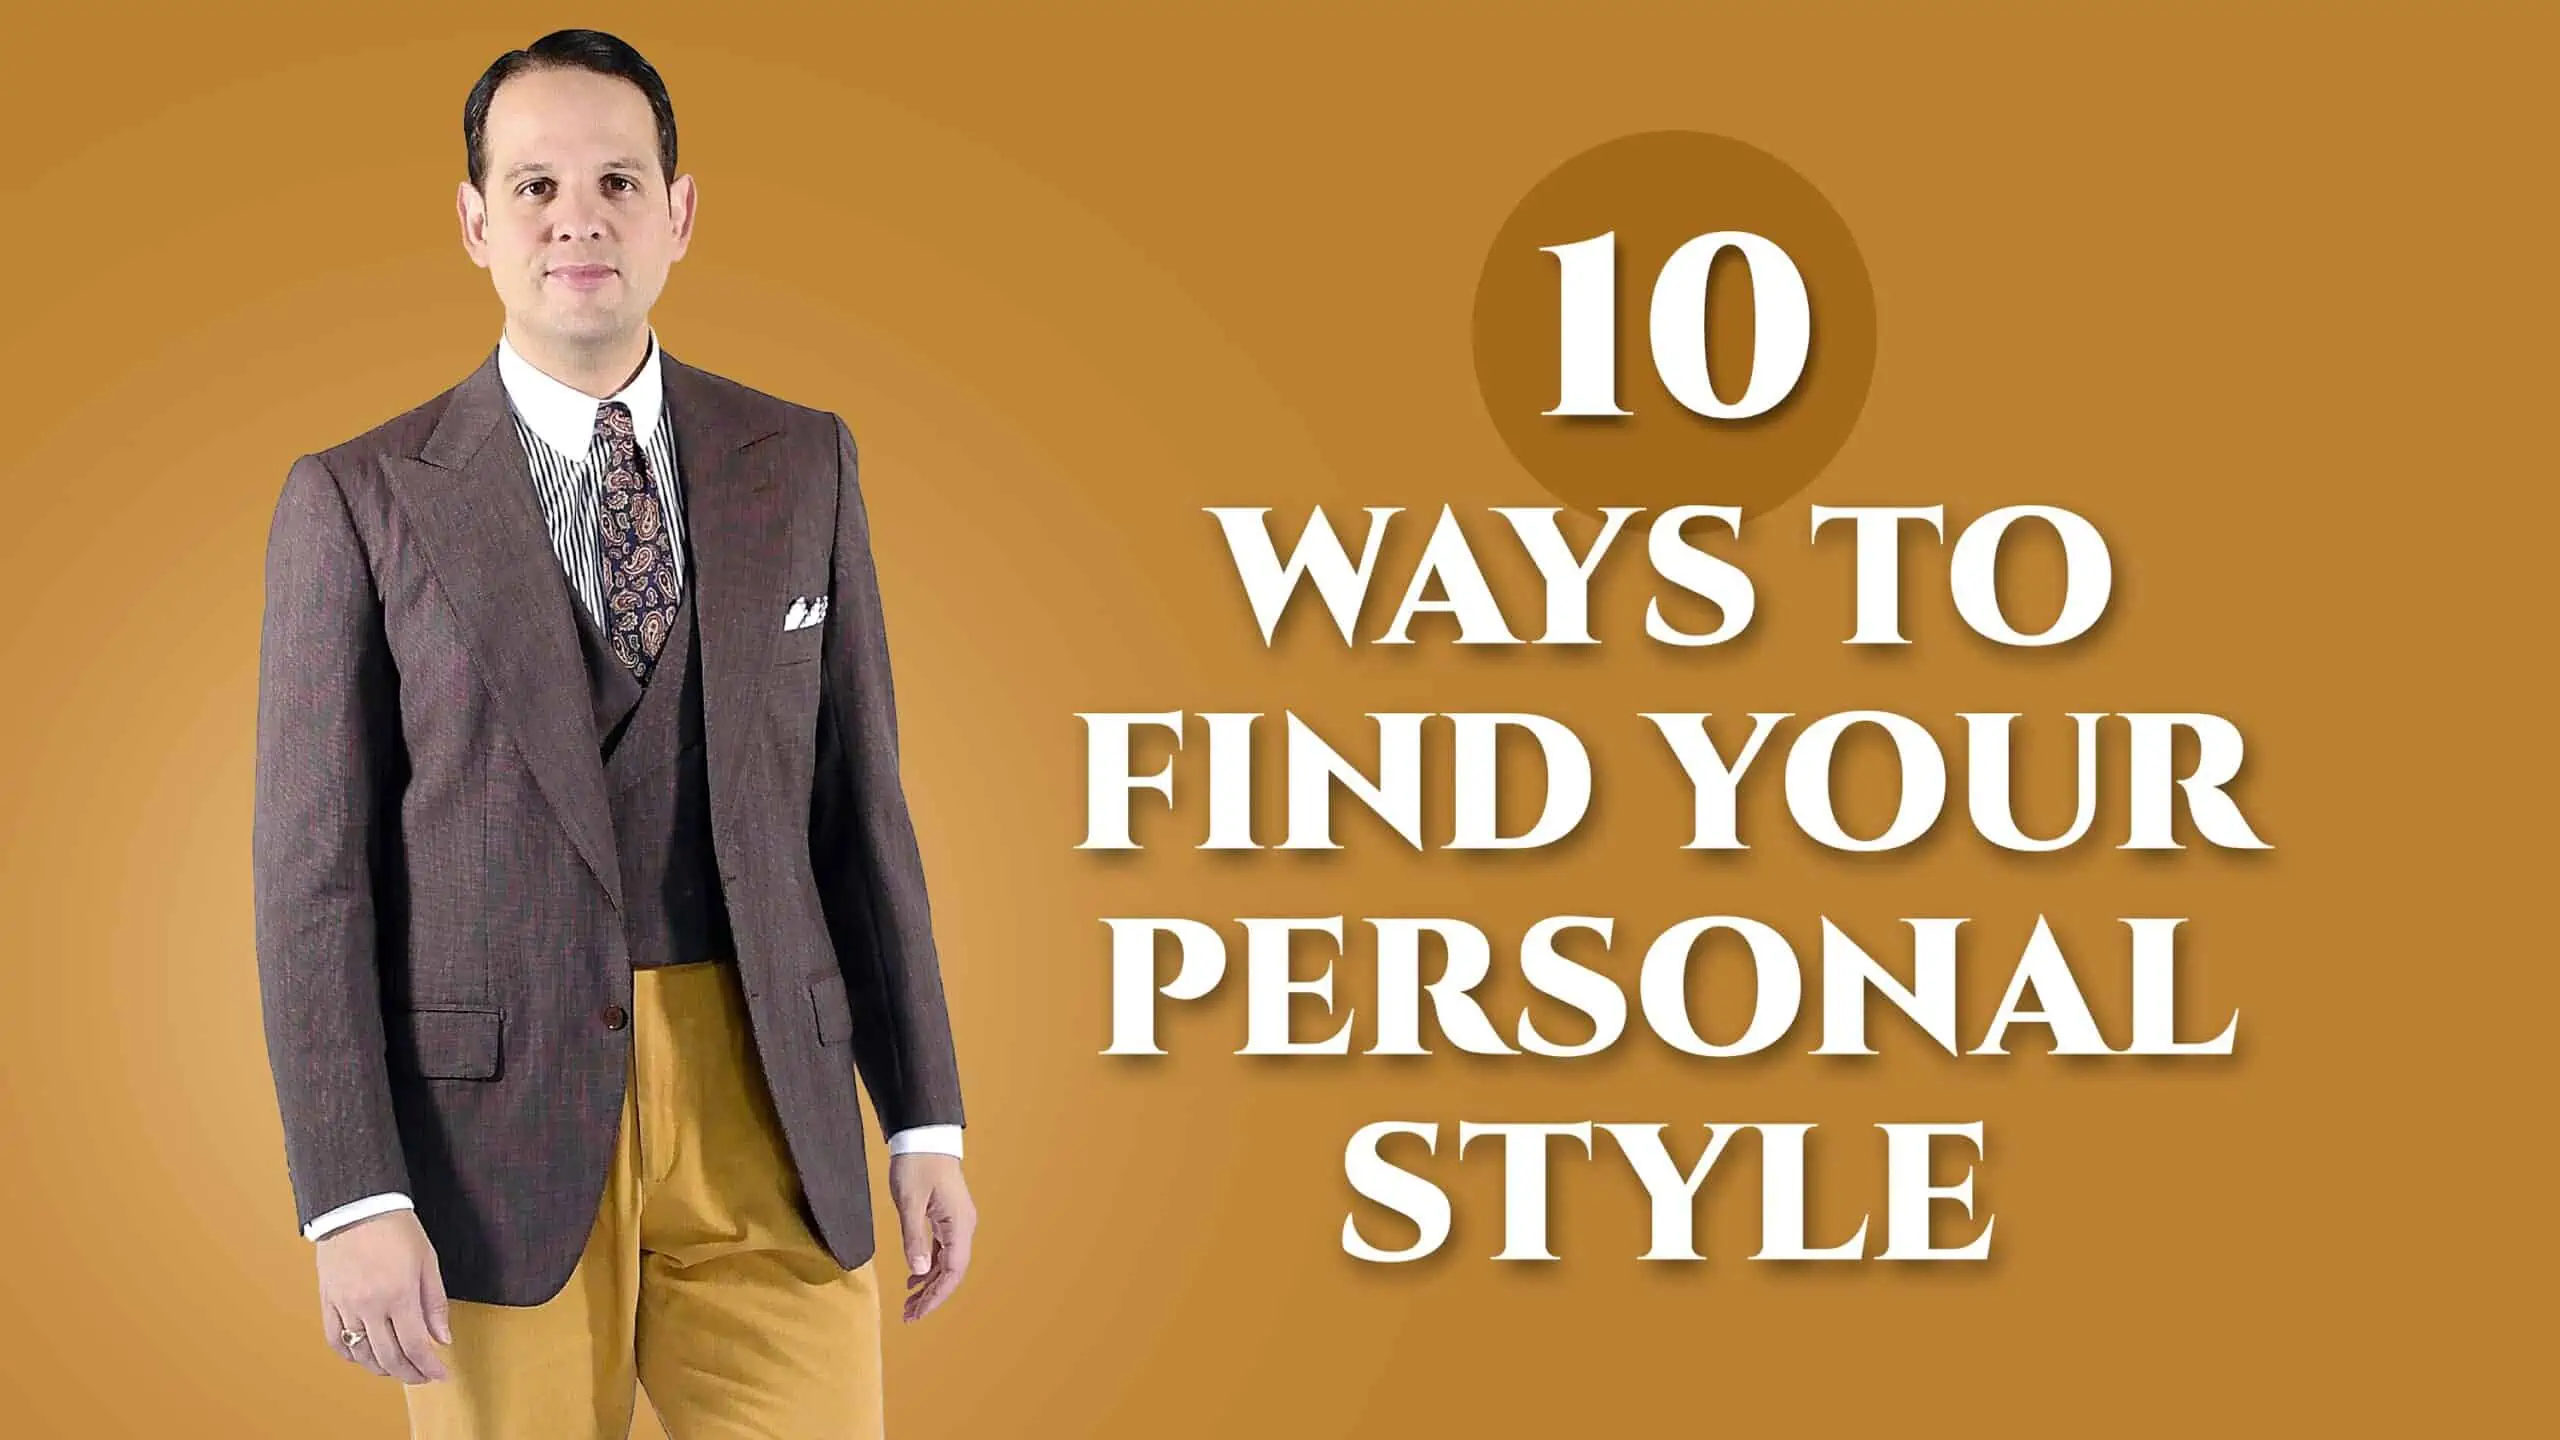 10 ways to find your personal style 3840x2160 scaled